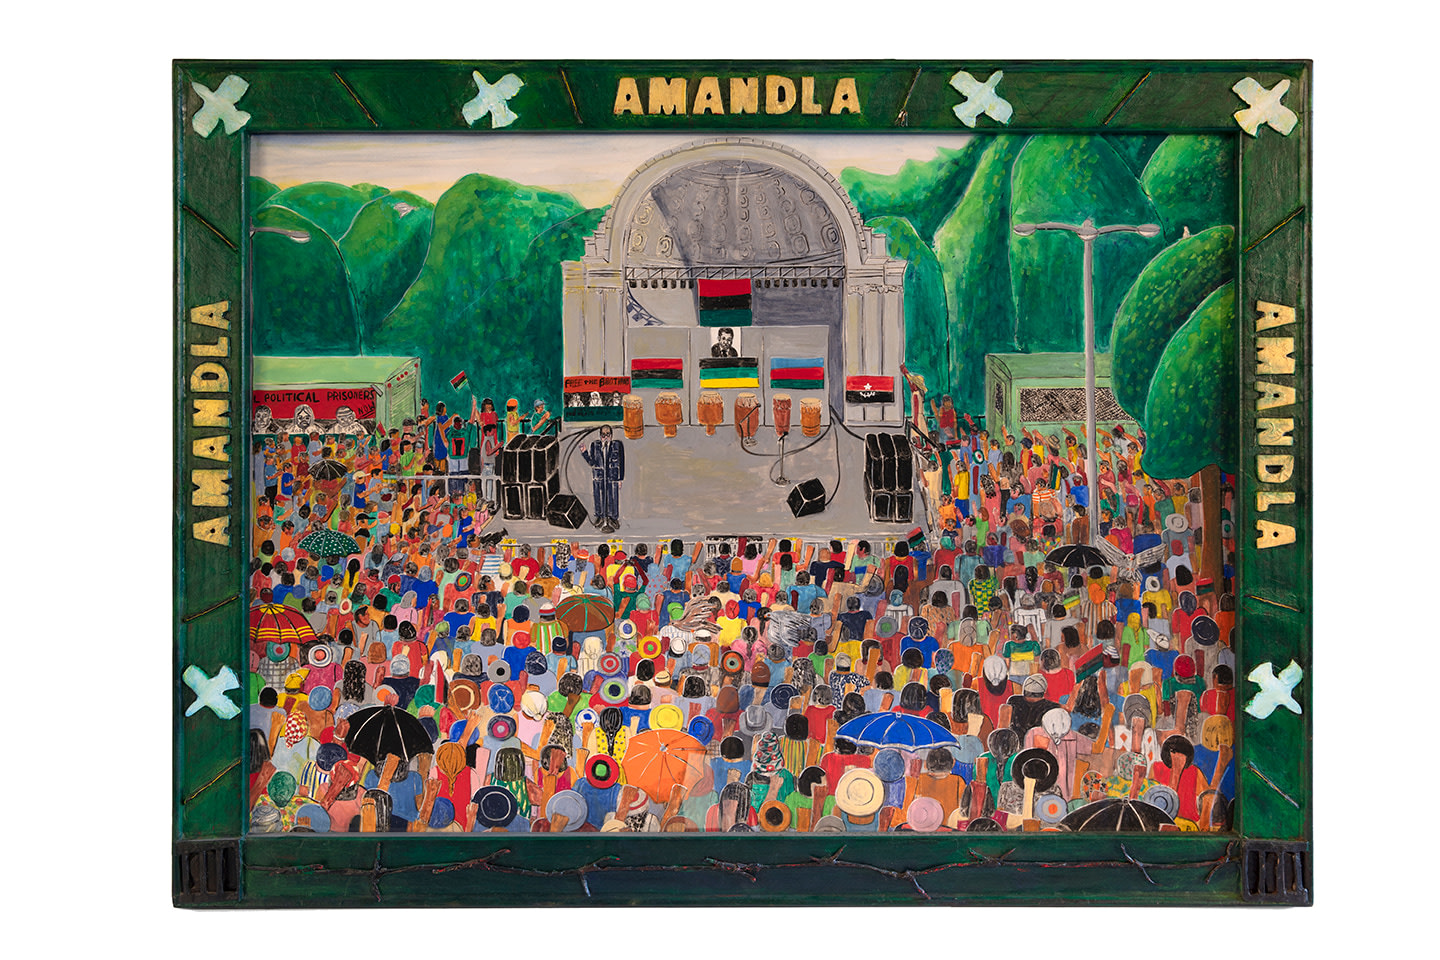 Birthday Celebration for Nelson Mandela, 1988&amp;nbsp;
Pencil graphite and gouache on paper with acrylic painted paper mache frame&amp;nbsp;
42.5 x 56.5 x 1.75 inches

&amp;nbsp;